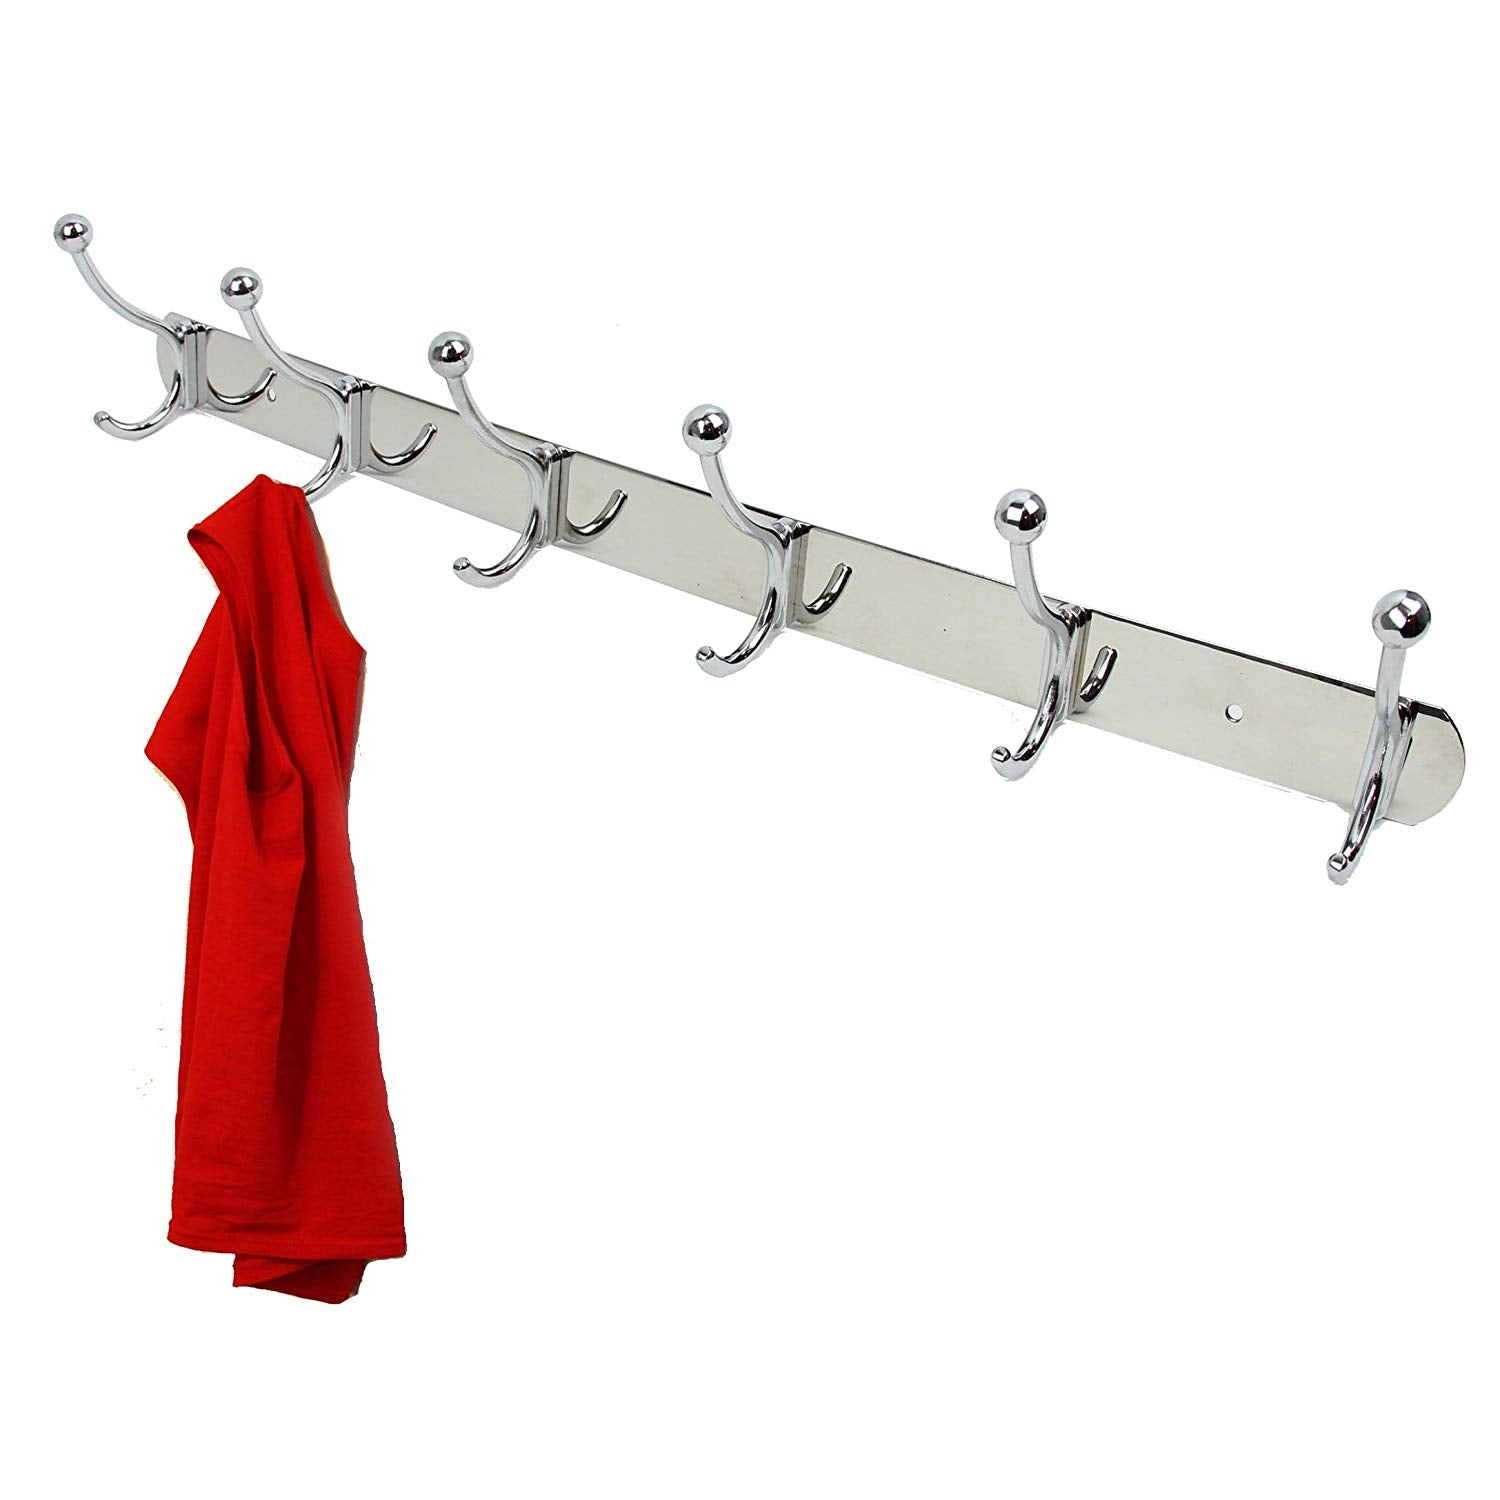 6 Double Hook Coat Rack,12 Hooks, Wall Mount with Screws Included, polished nickel silver great for hallway or any room!! space saver! coat organizer, towel hooks. Screw caps to cover screws